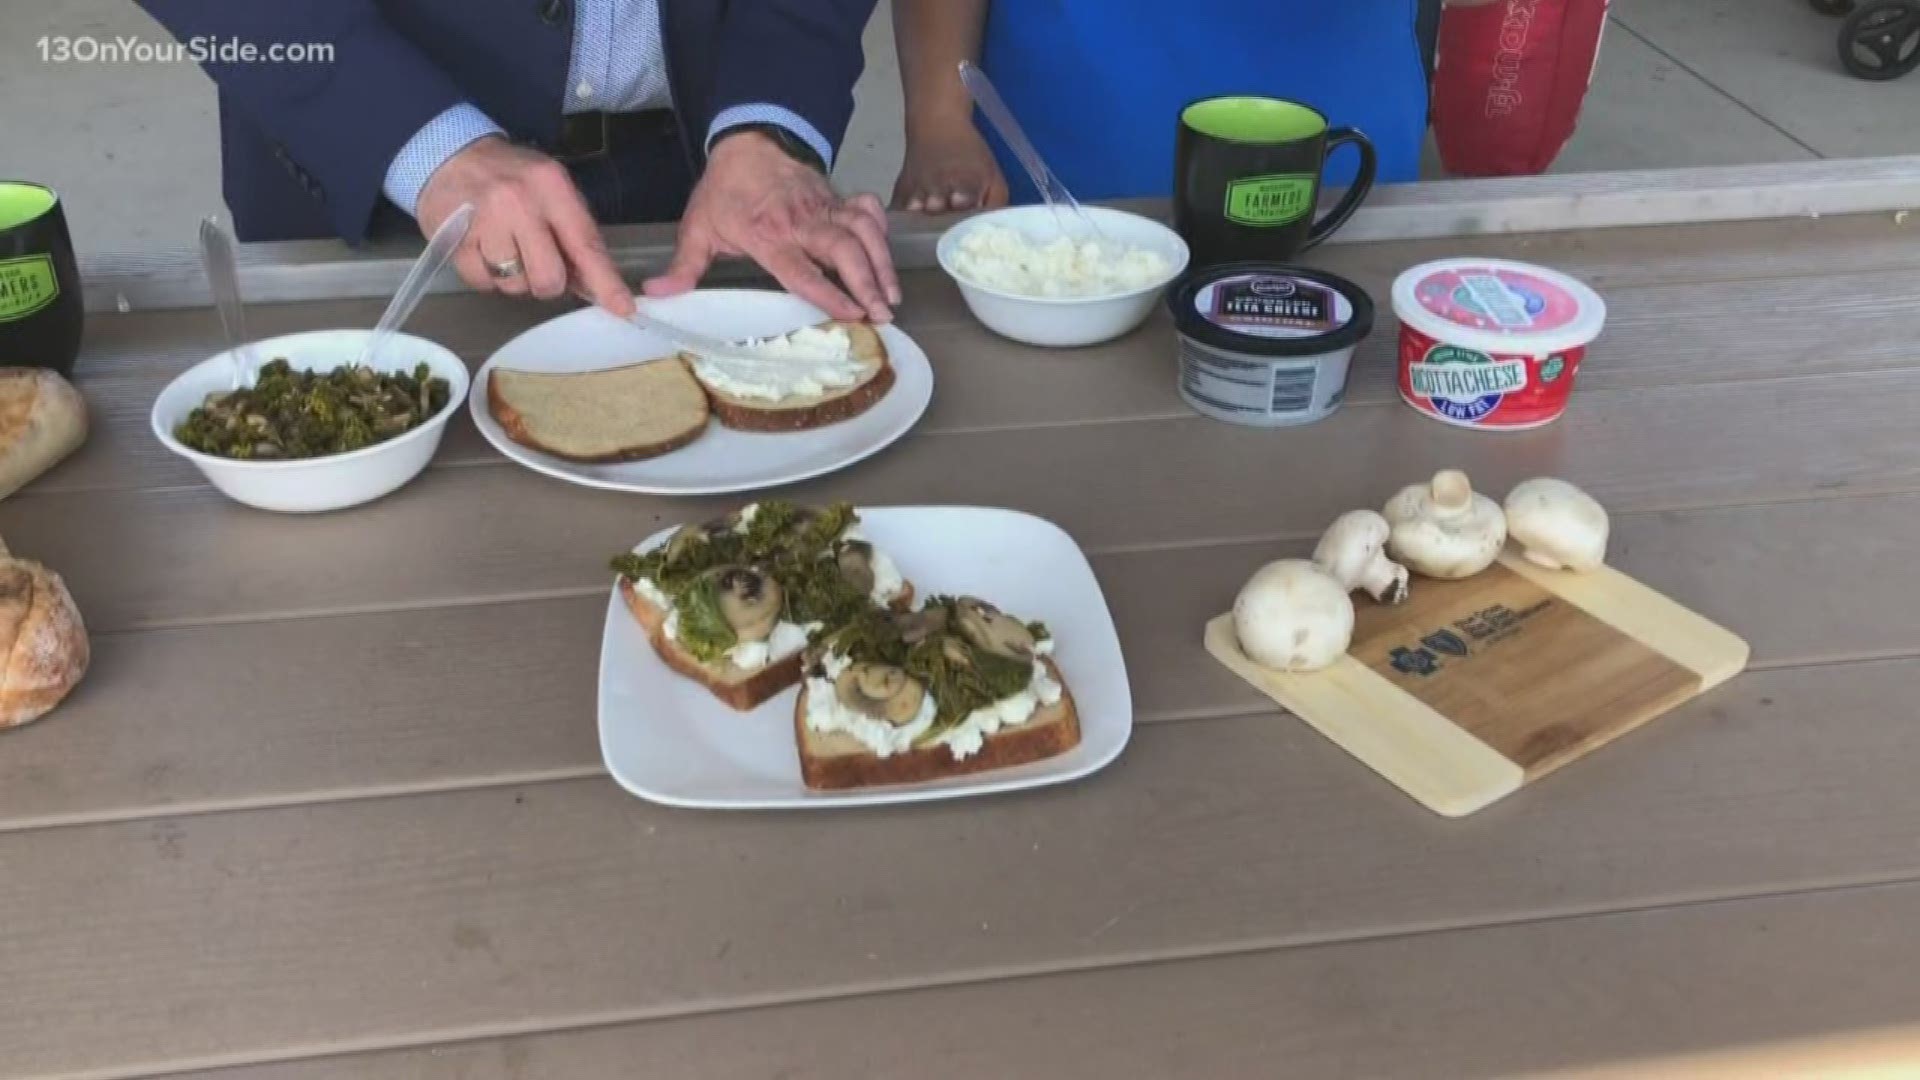 Jelly? Butter? Are you bored of the everyday toast toppings? Well, you're in luck! We stopped by the Muskegon Farmers Market to meet registered dietitian Grace Derocha, who came up with a new twist on traditional toast.